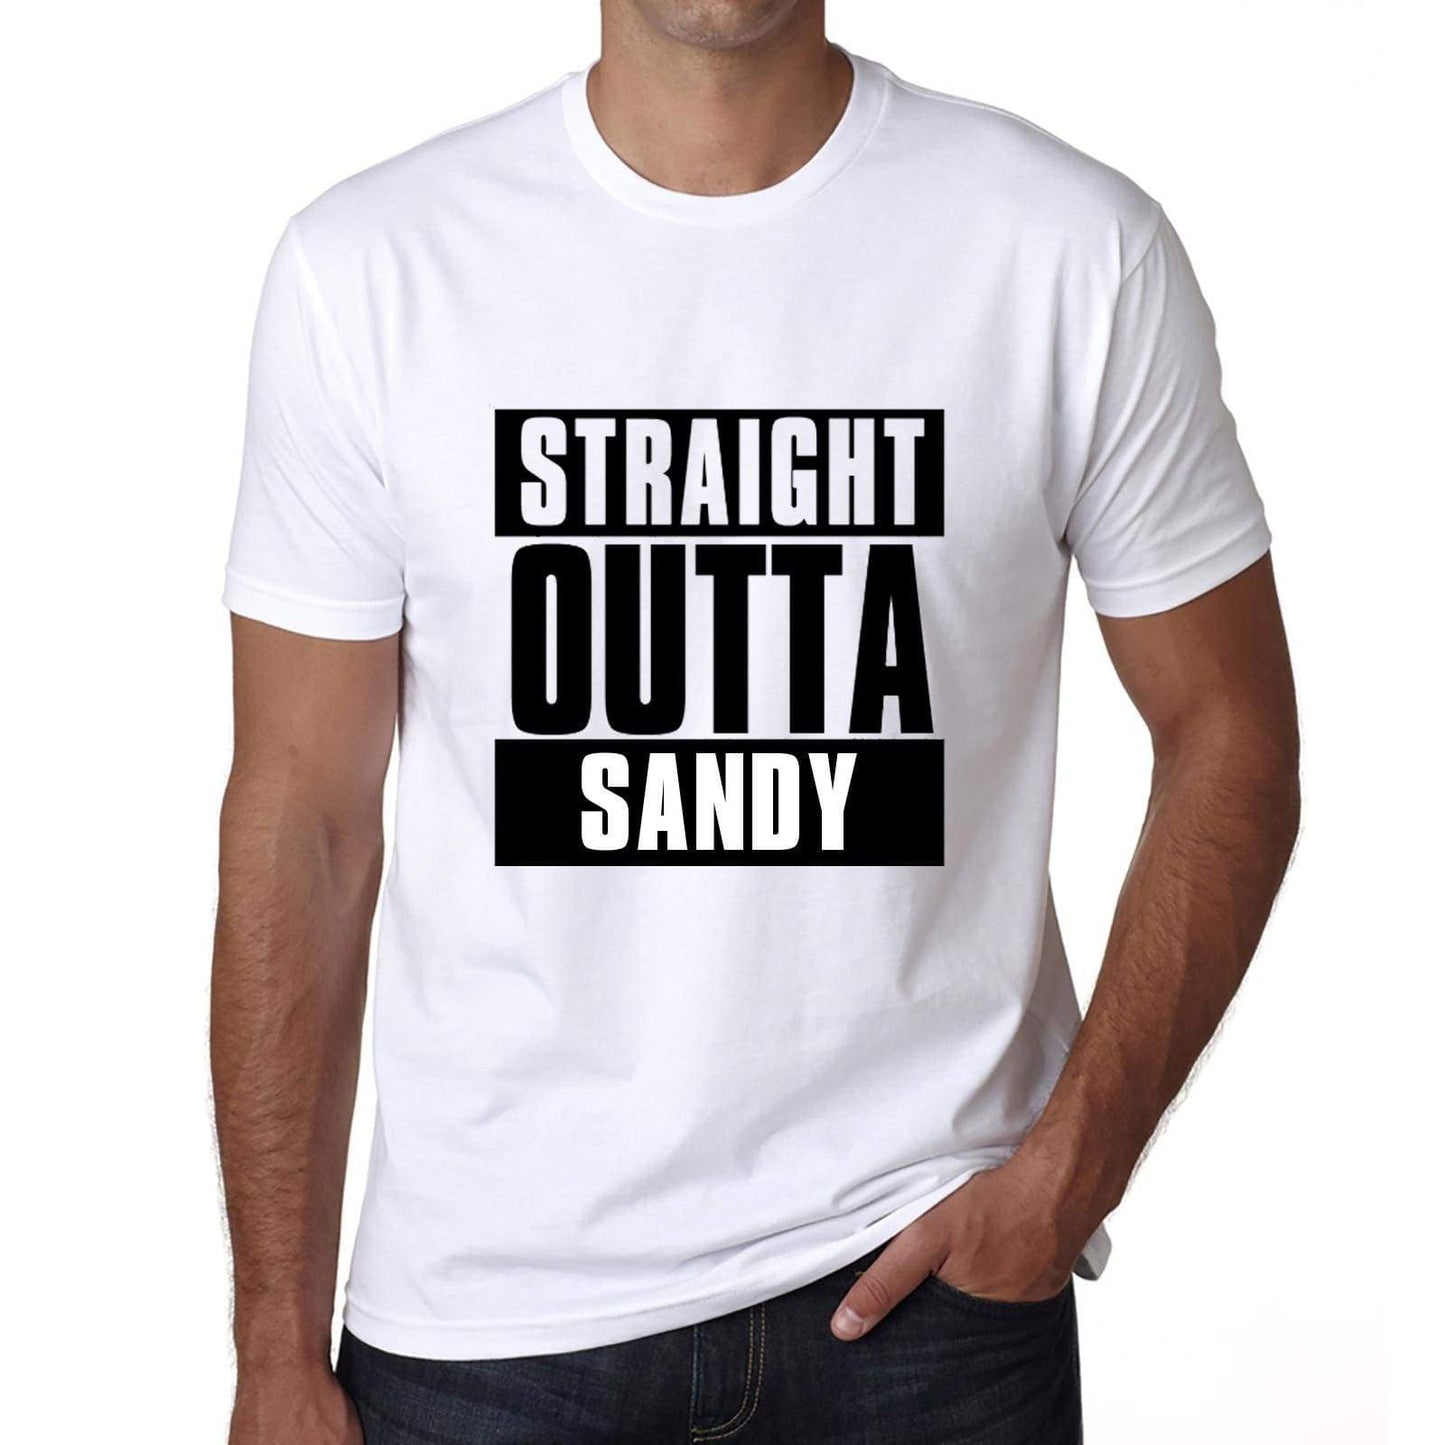 Straight Outta Sandy Mens Short Sleeve Round Neck T-Shirt 00027 - White / S - Casual